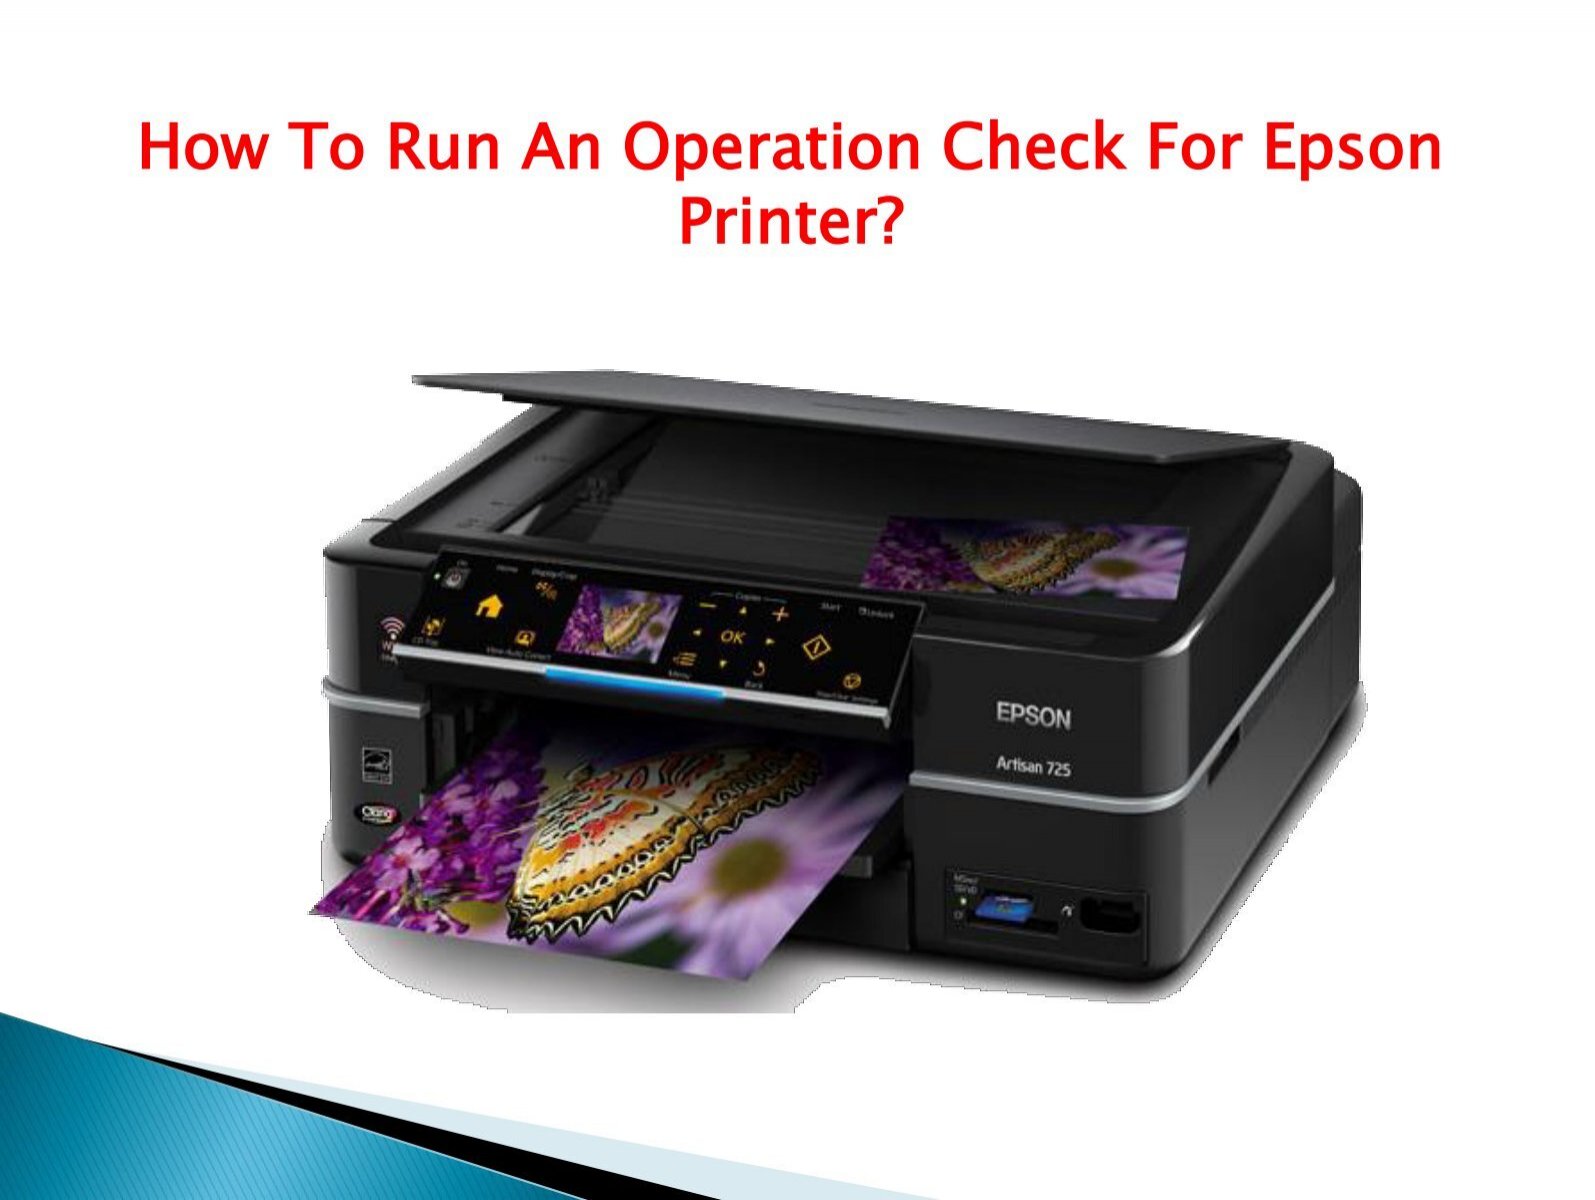 How To Run An Operation Check For Epson Printer 7870